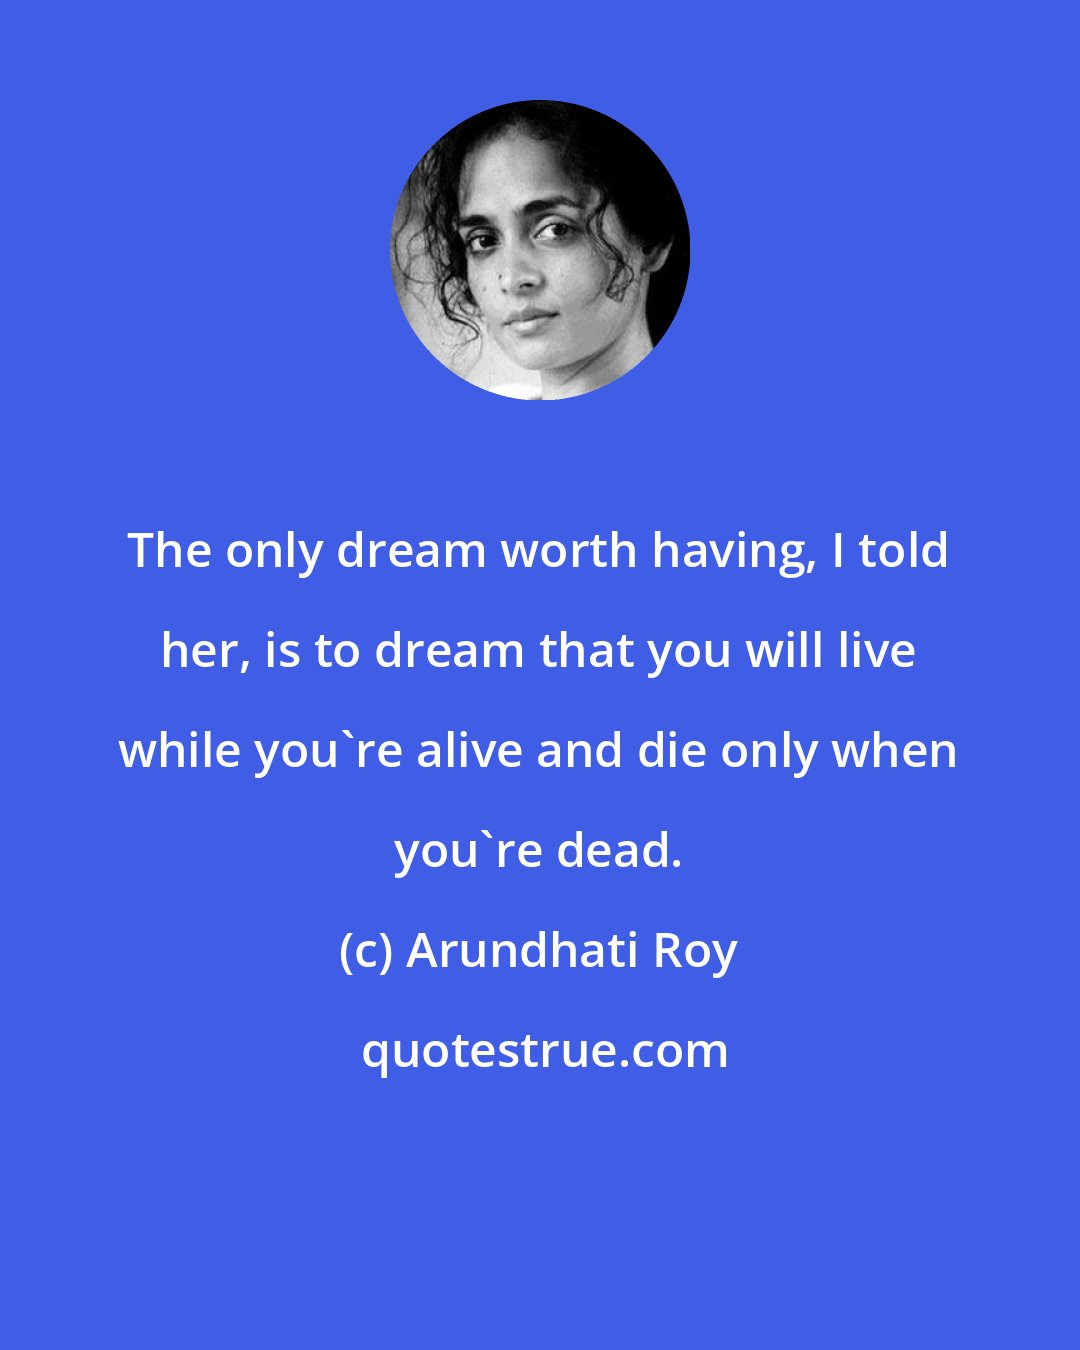 Arundhati Roy: The only dream worth having, I told her, is to dream that you will live while you're alive and die only when you're dead.